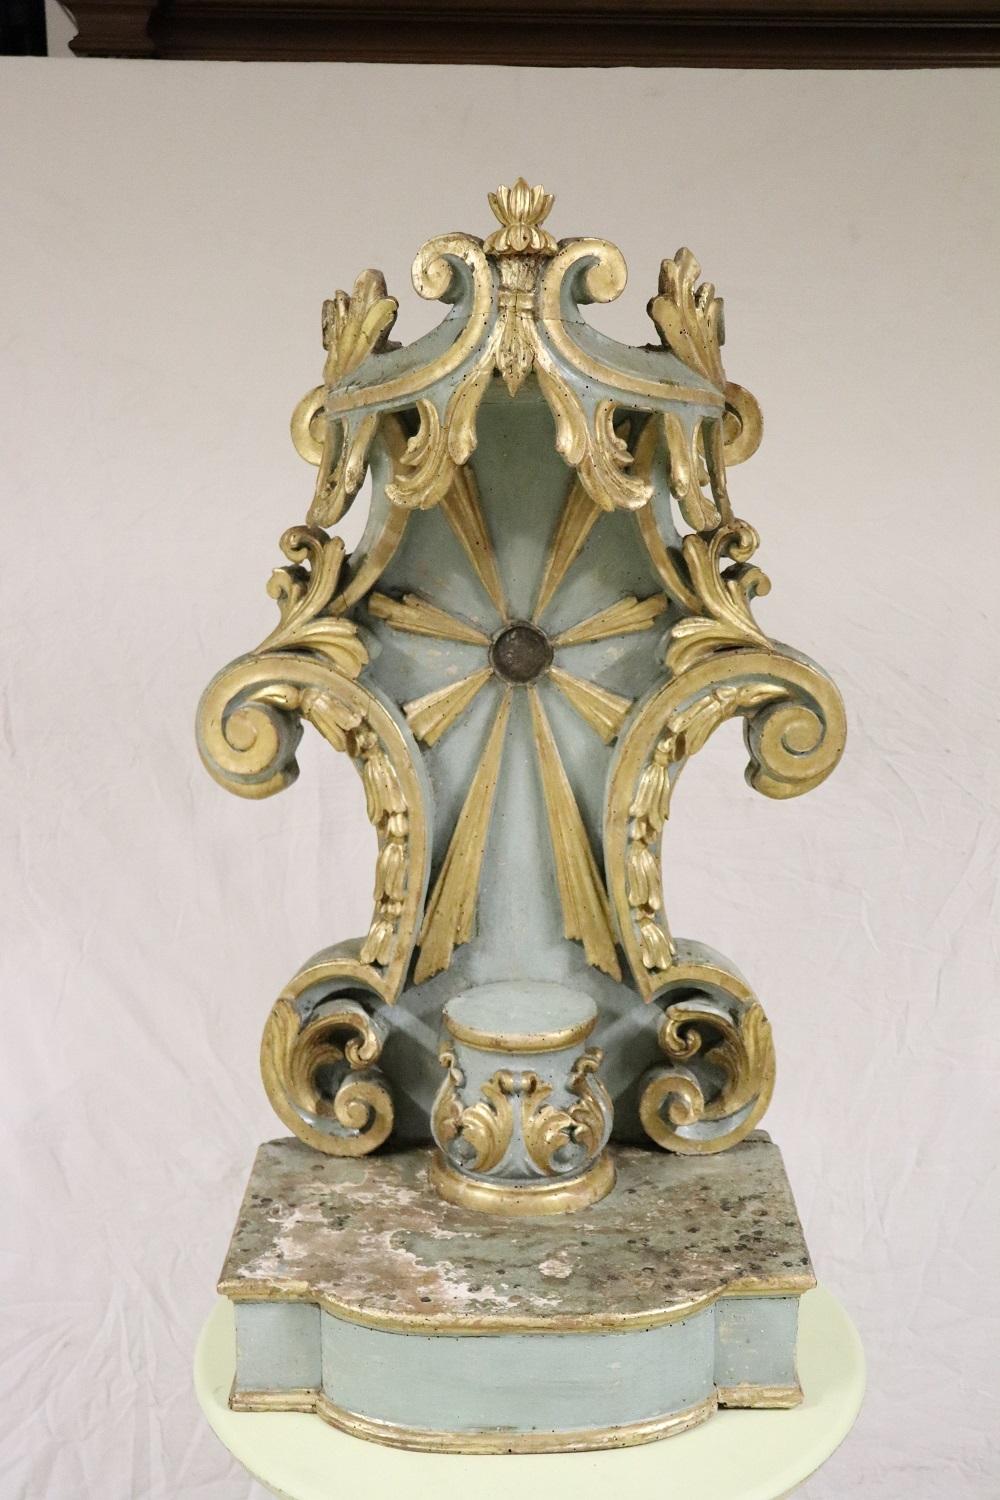 Rare and important antique Temple made of lacquered and gilded wood. Rich decoration carved in wood with curls and scrolls. Entirely covered with precious gold leaf. Item to be placed in the middle of the Baroque period, also present the original